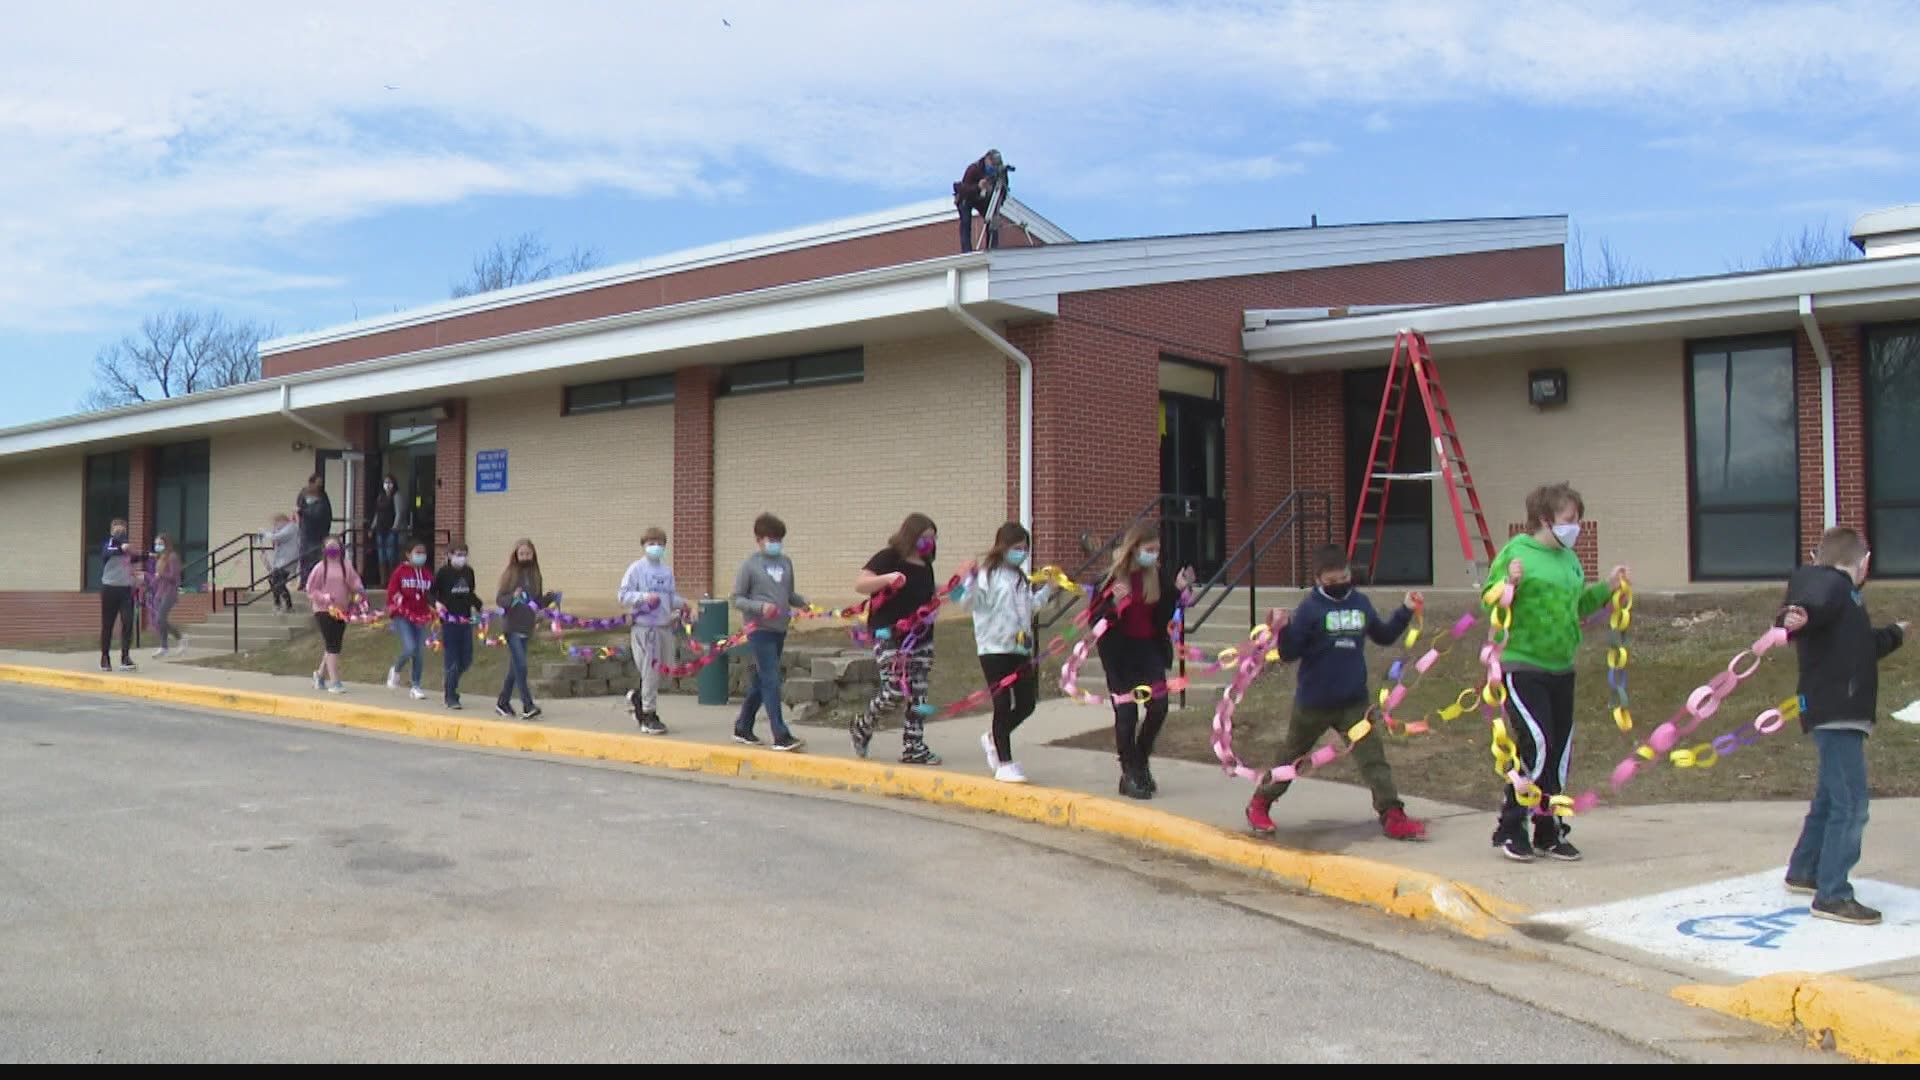 The Gosport elementary program motivated 150 students to initiate hundreds of acts of kindness